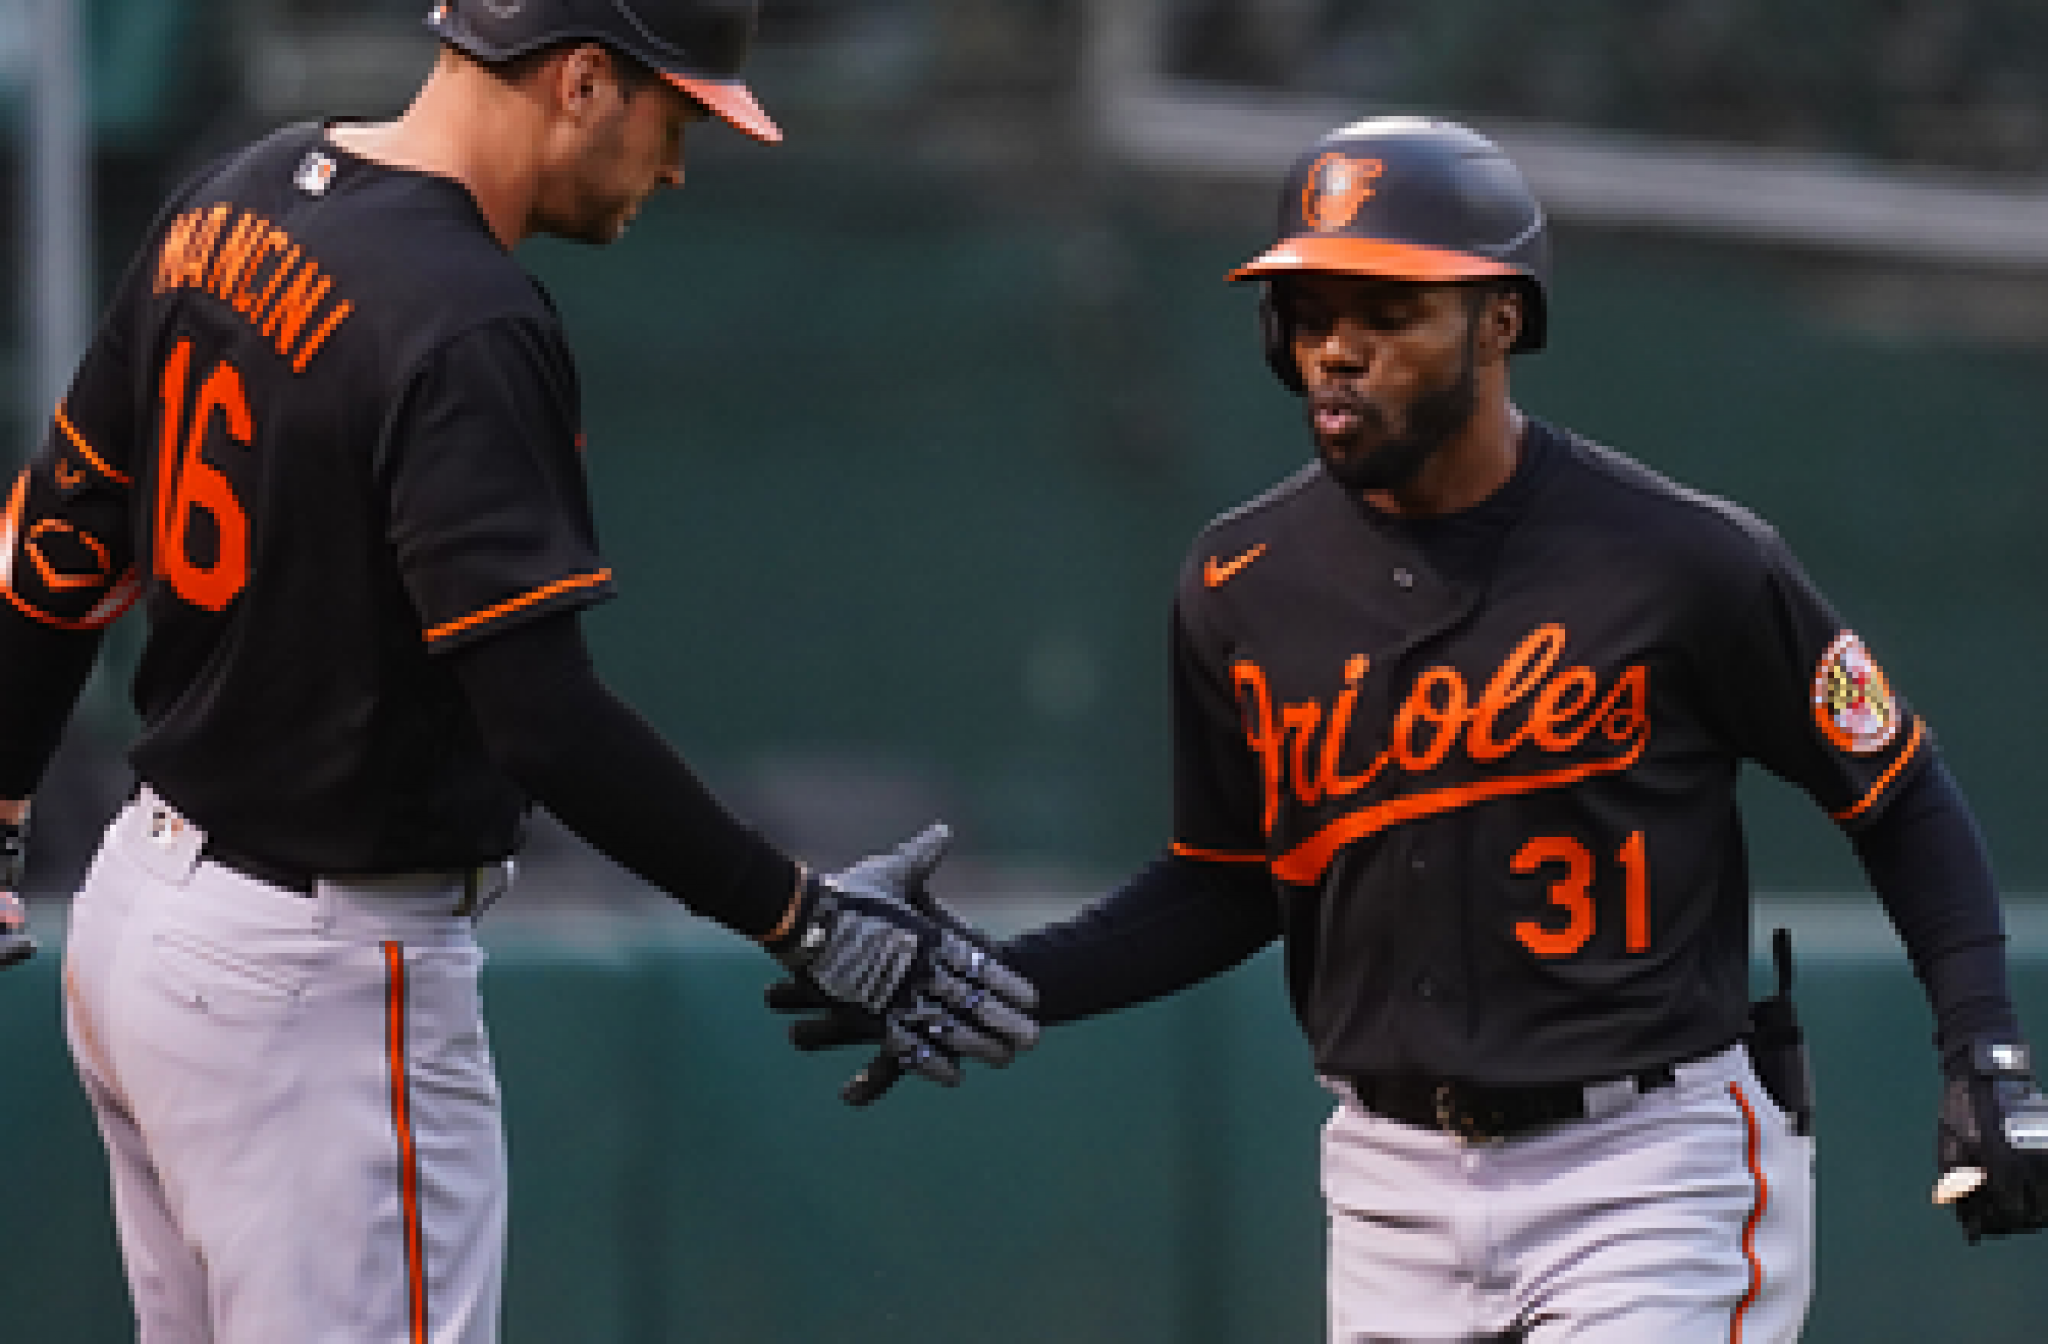 Cedric Mullins homers, drives in two runs as Orioles edge Athletics, 3-2